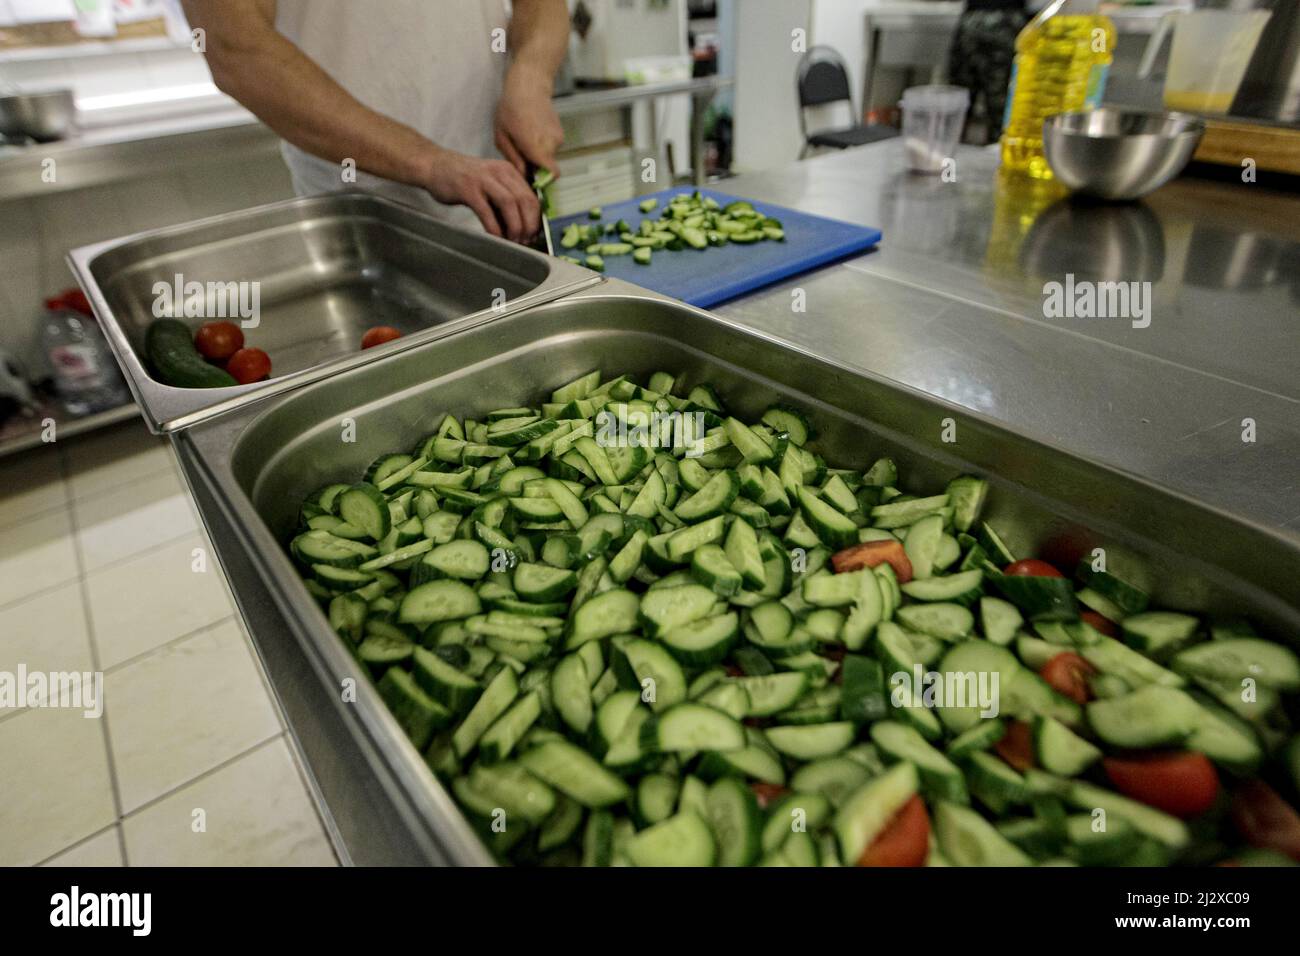 KYIV, UKRAINE - APRIL 1, 2022 - A cook slices cucumbers as nearly 400 meals for Territorial Defence Forces, Ukrainian Railways workers, sappers, borde Stock Photo